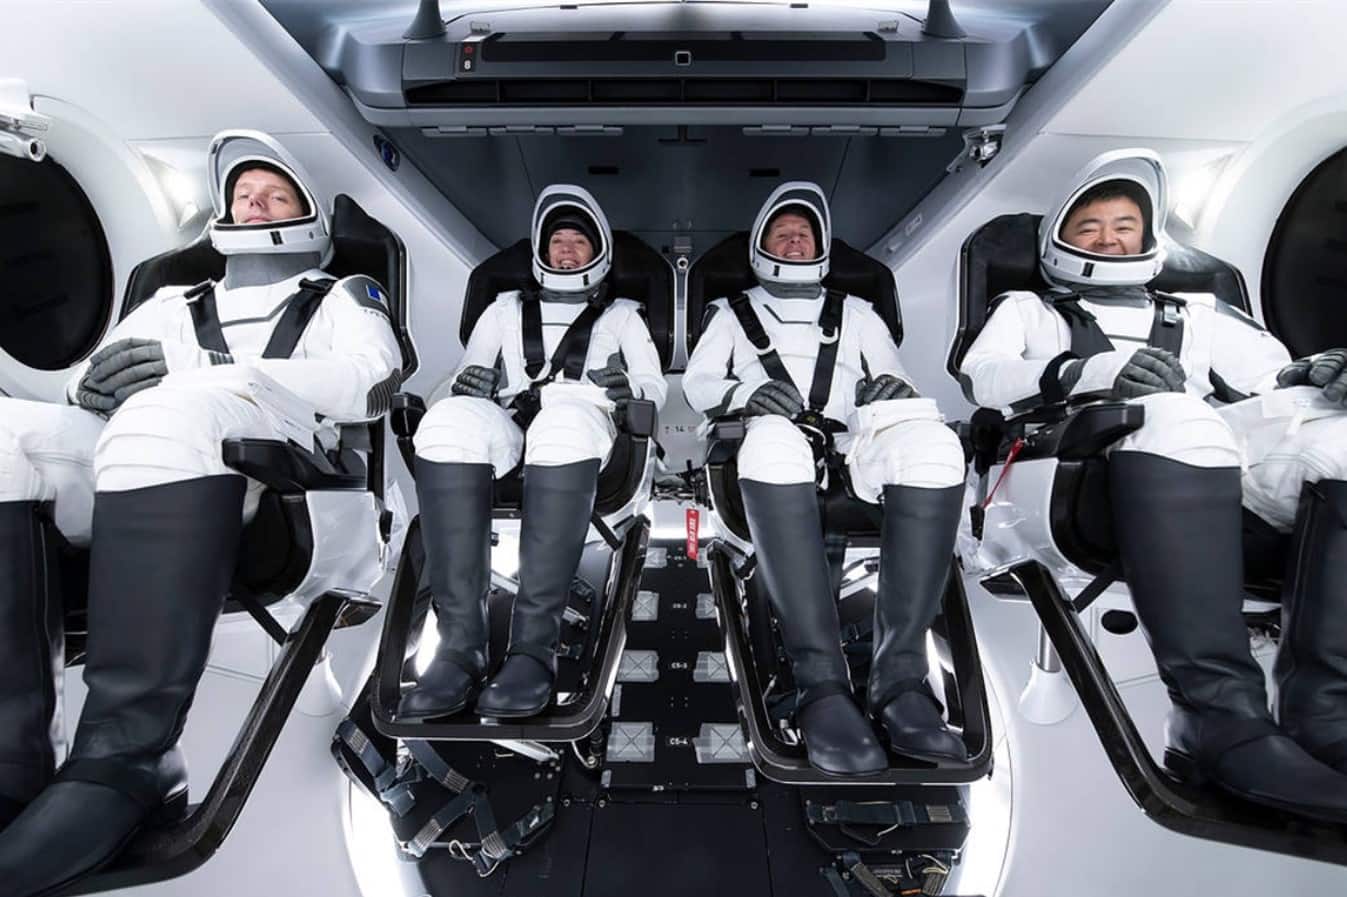 Astronauts of NASA-SpaceX Crew-2 mission